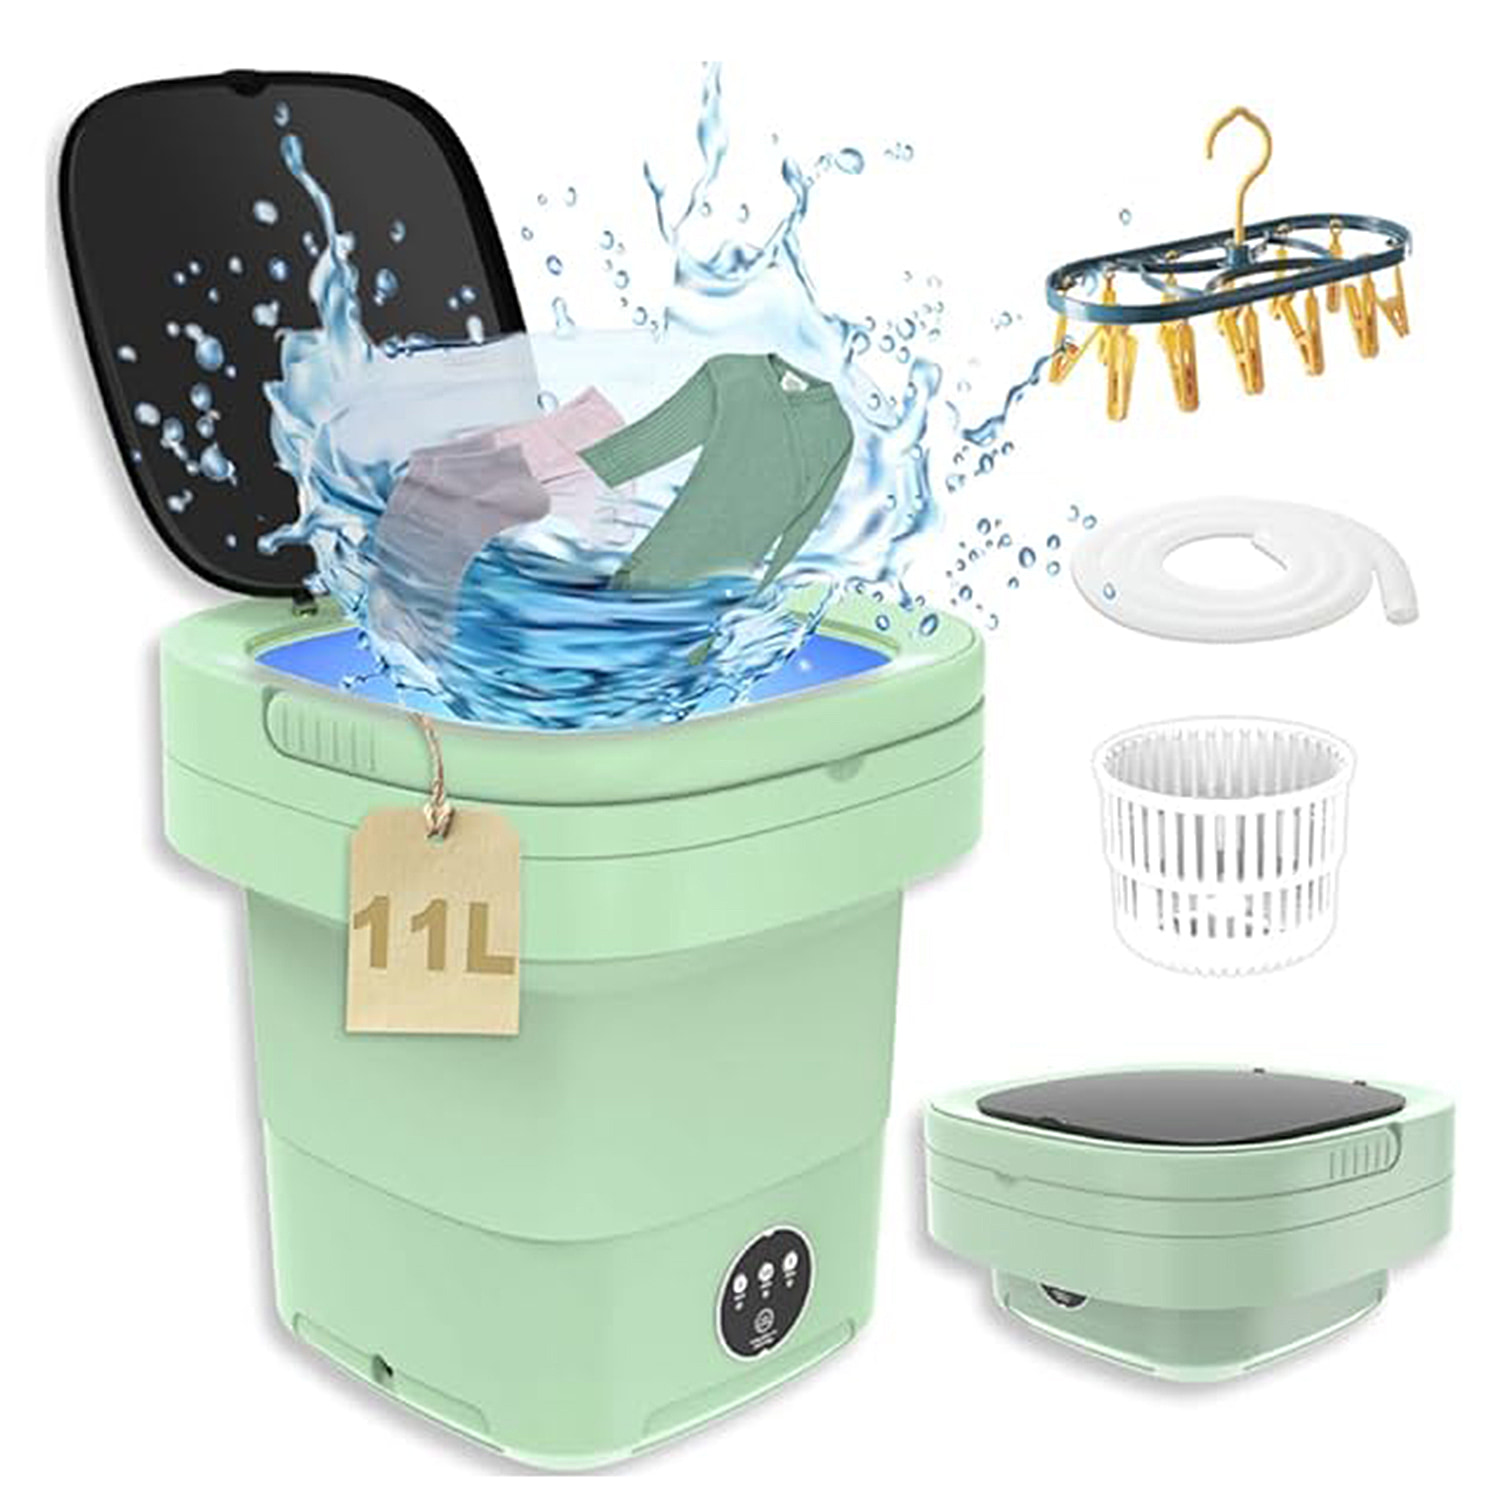 35 W Energy Efficient Foldable & Portable Mini Washing Machine with 11L Capacity - Green With FREE Colour Catcher Sheets